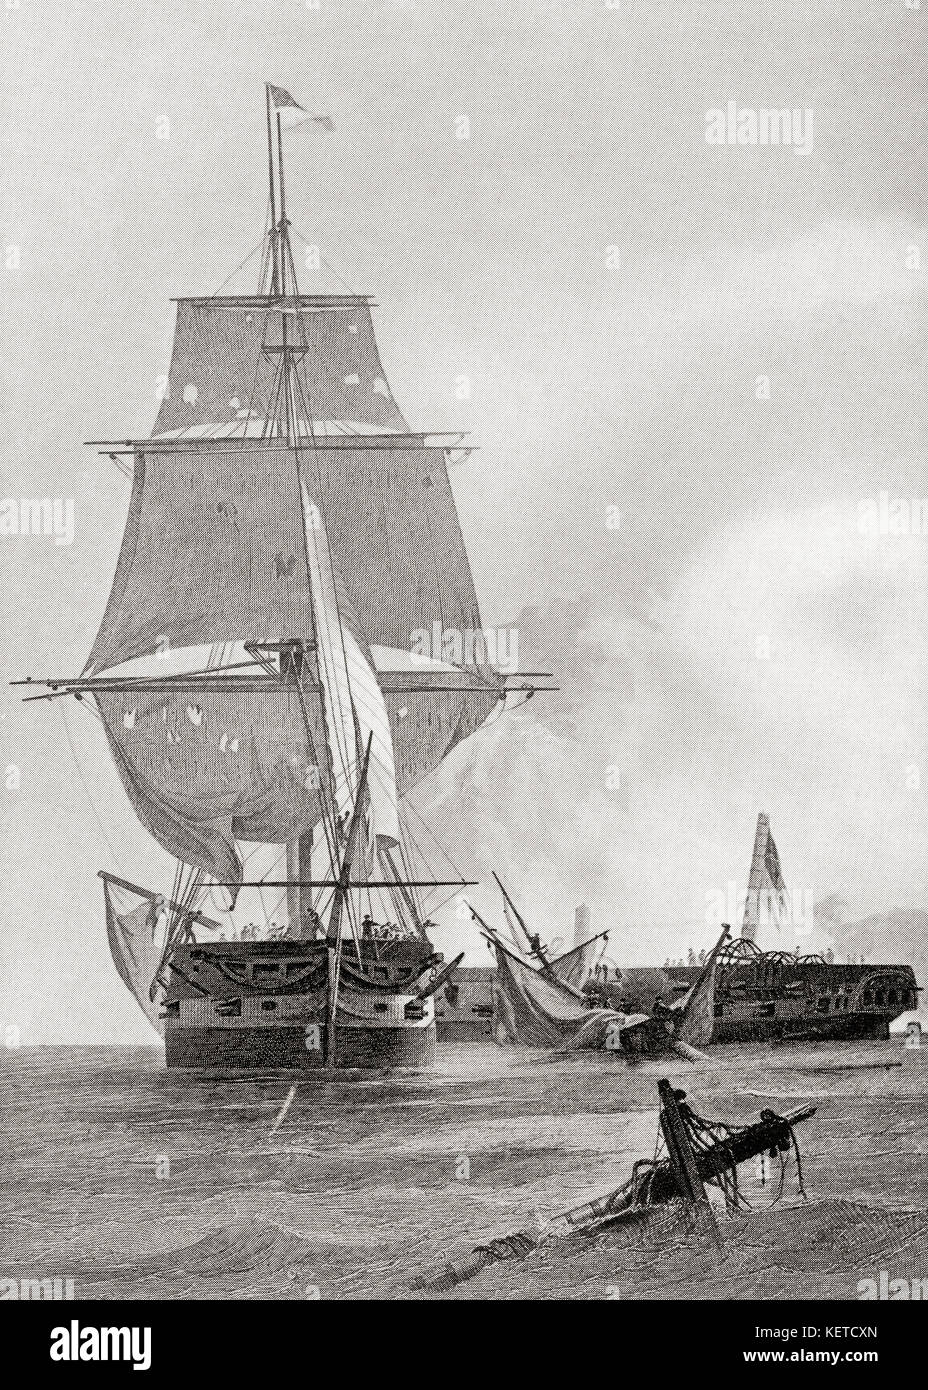 The battle between the two ships USS Constitution and HMS Guerriere during the War of 1812.  From Hutchinson's History of the Nations, published 1915. Stock Photo